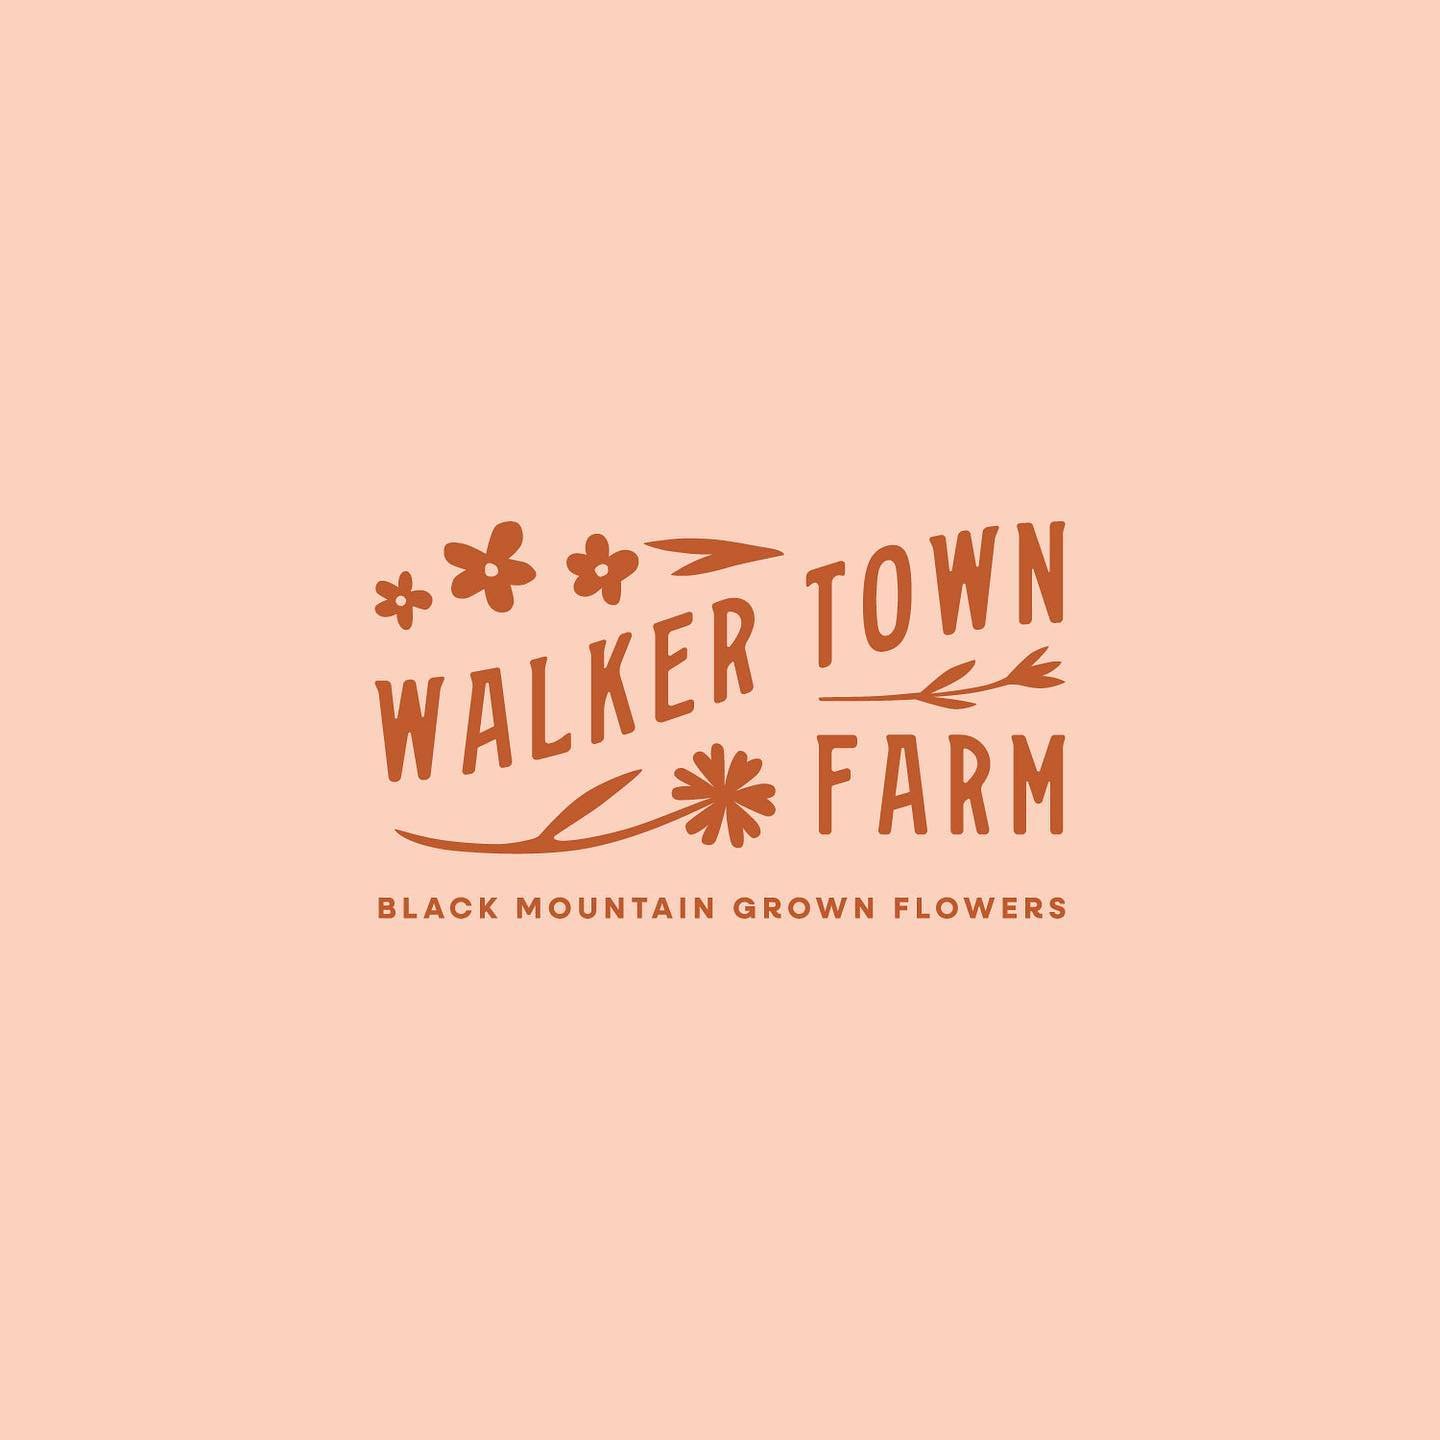 Presenting a new logo and brand update for @walkertownfarm ! Jenny of Walker Town Farm has been in business for 5 years now, growing gorgeous flowers at her homestead in Black Mountain, NC. I designed her website years ago and loved working with her 